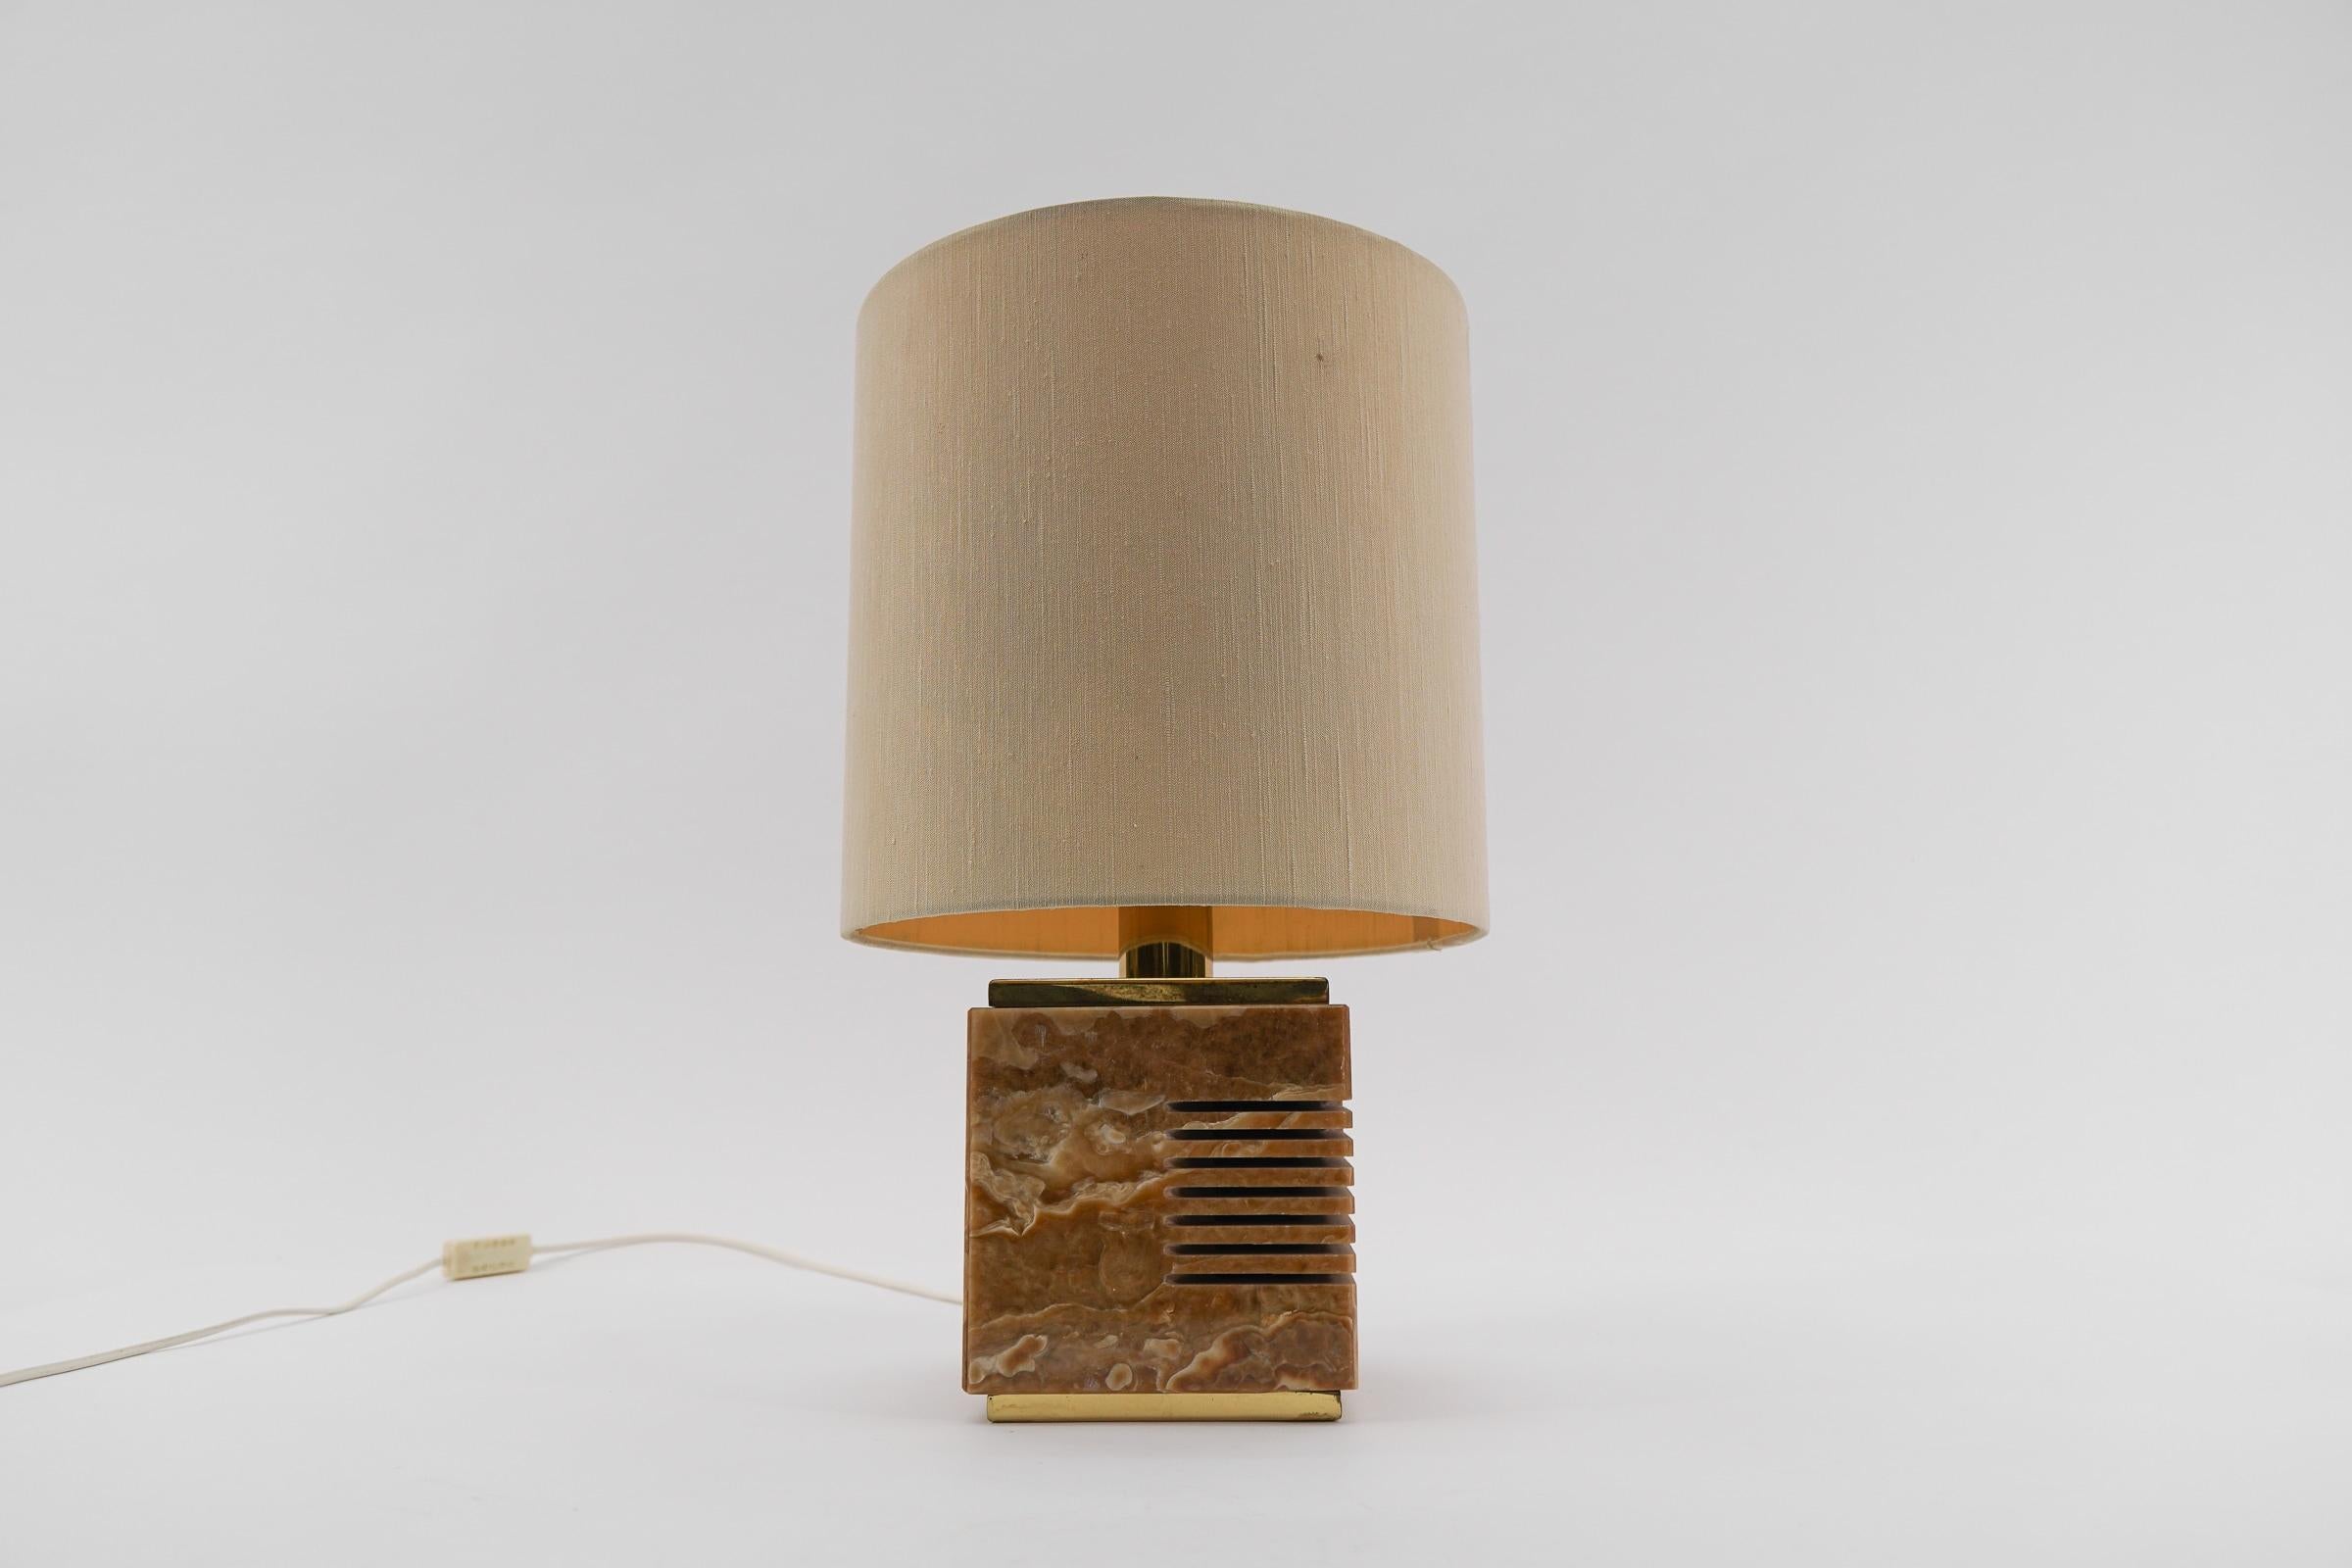 Executed in marble, brass and fabric. The lamp need 1 x E27 / E26 Edison screw fit bulb, is wired, in working condition and runs both on 110 / 230 volt.

Our lamps are checked, cleaned and are suitable for use in the USA. For usage in US you would